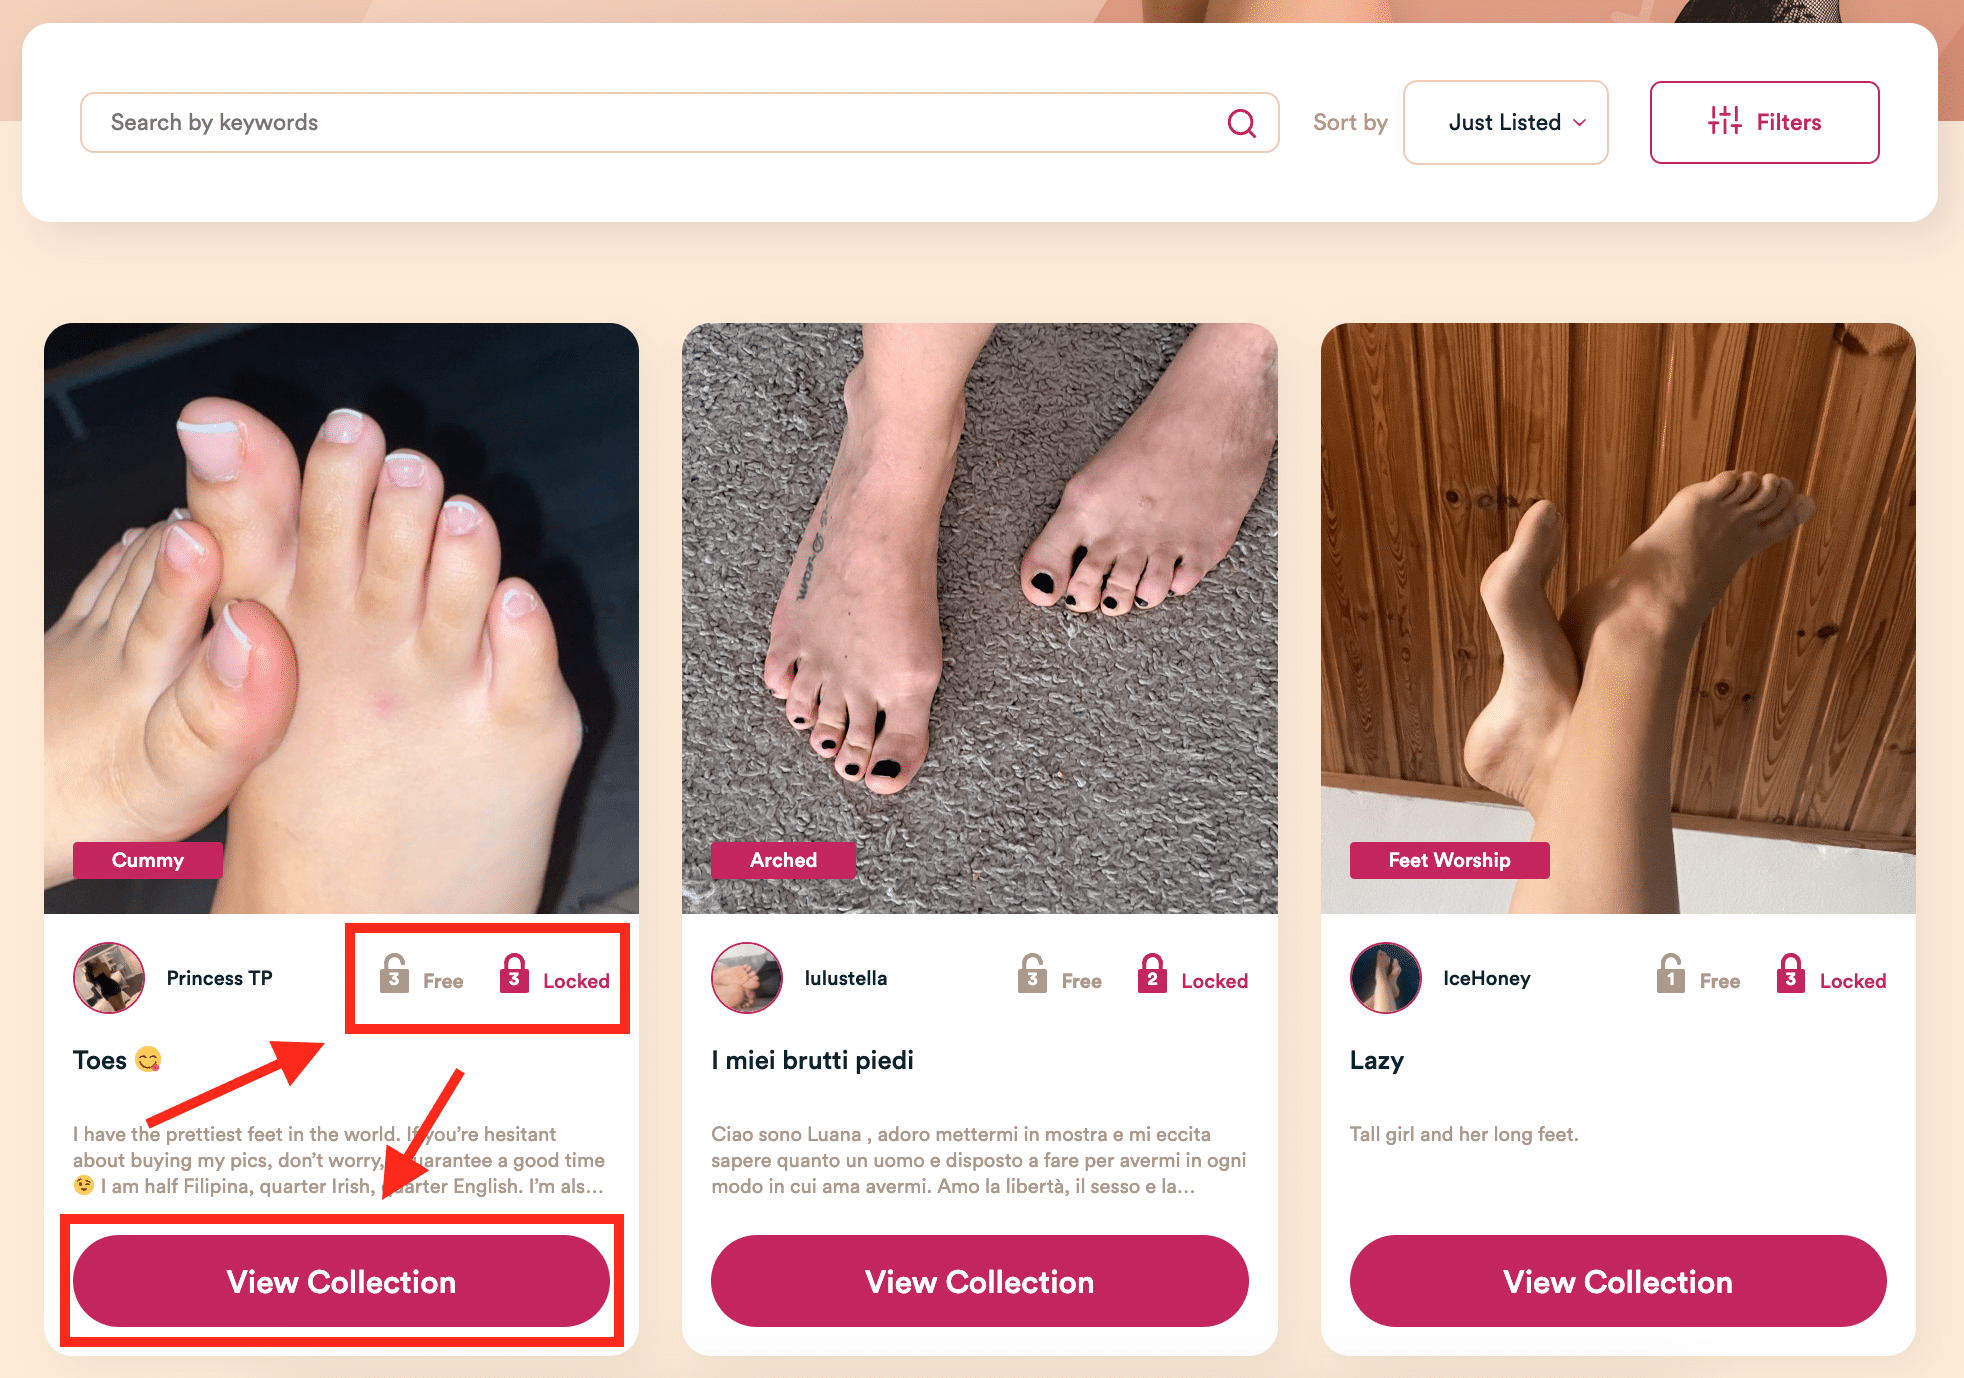 Sales page for photos of feet on Fun With Feet